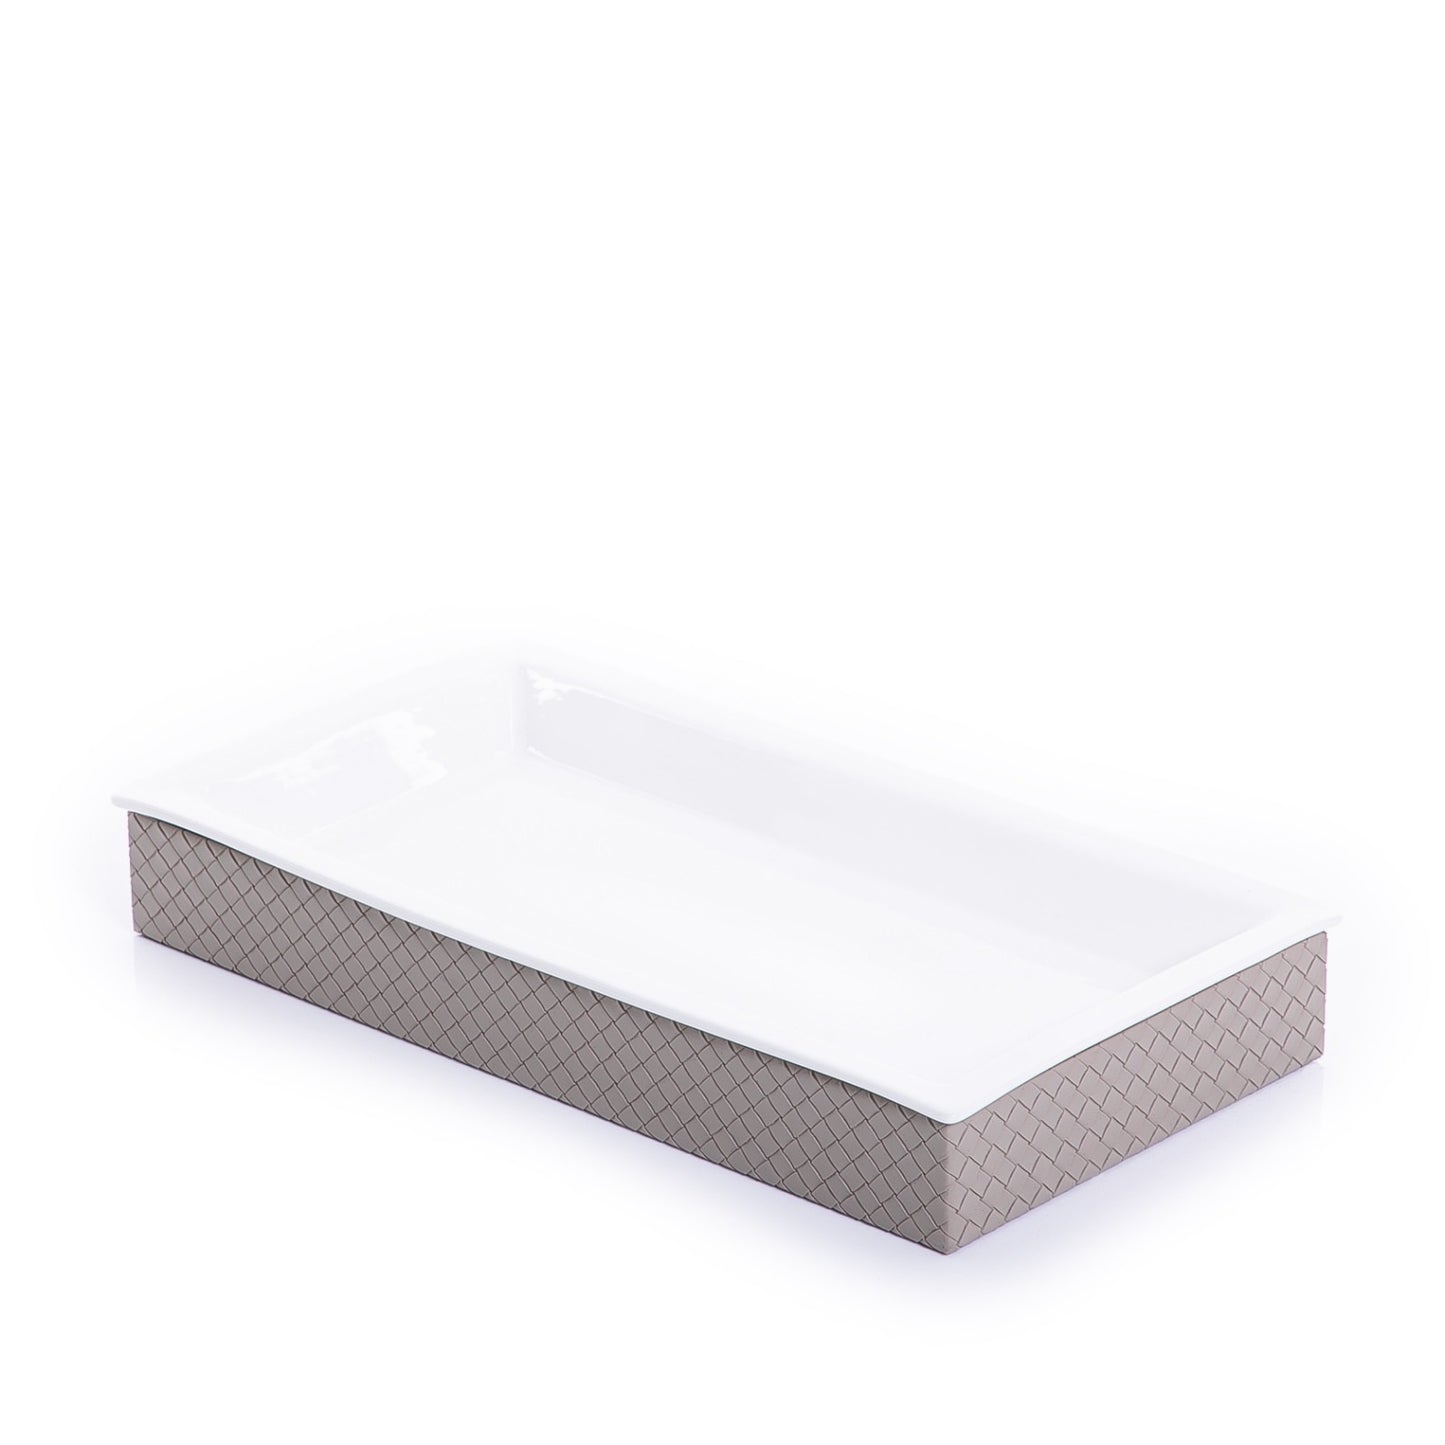 Ceramic Tray with Leather Base - 43cm